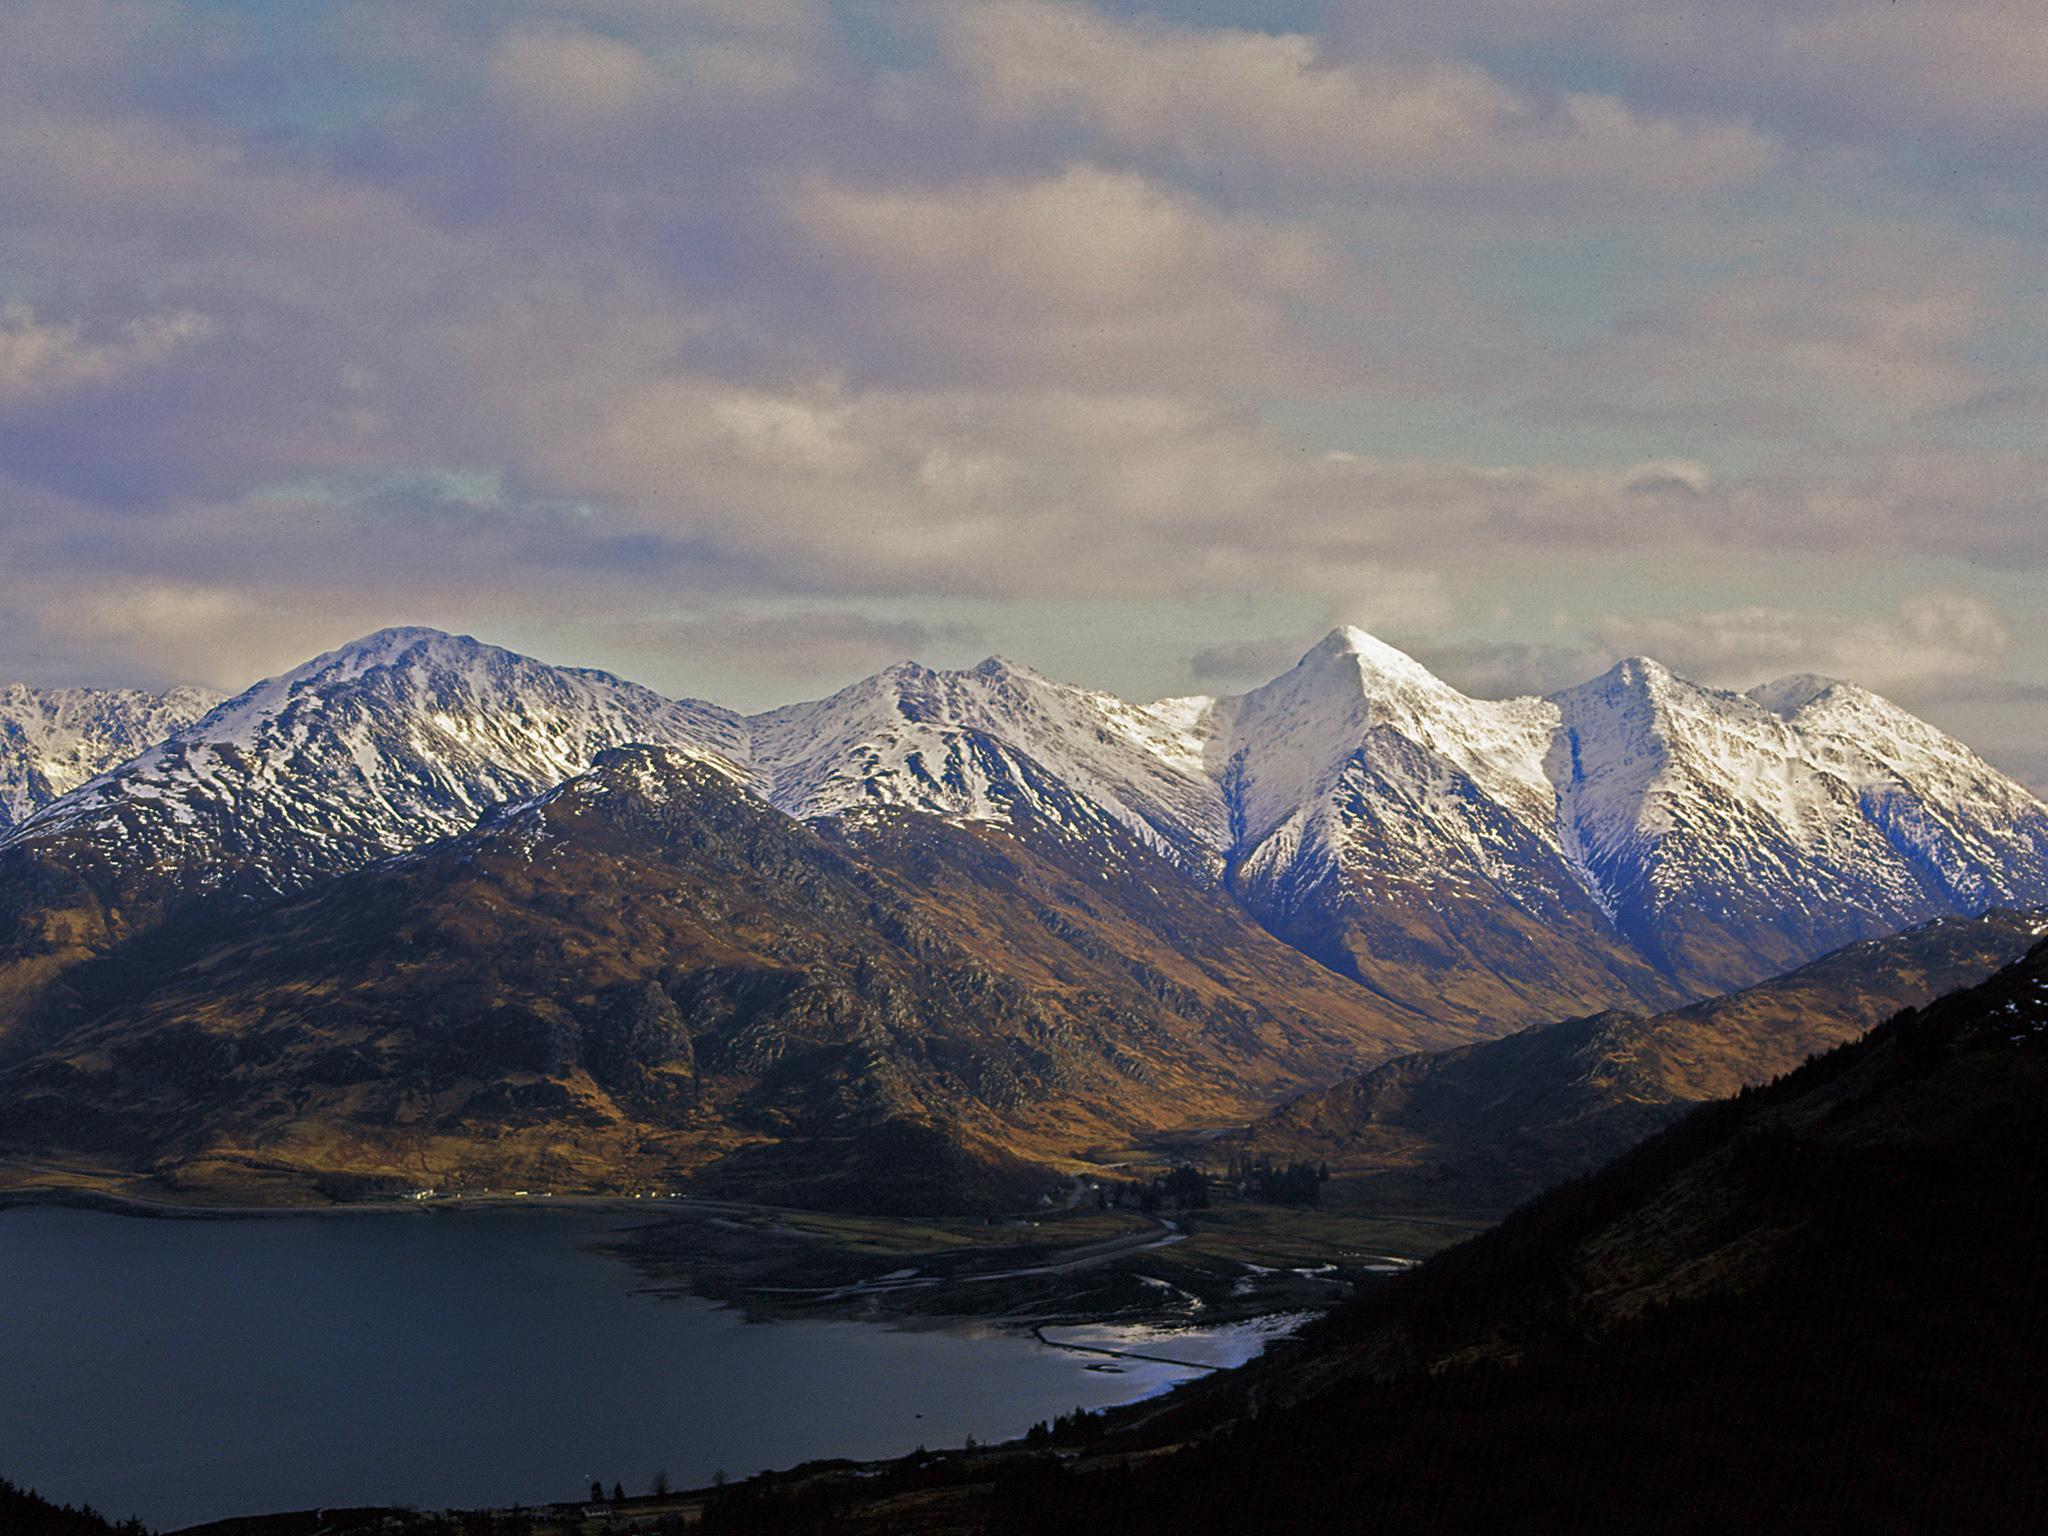 The Five Sisters of Kintail make up one of Scotland’s classic ridge walks